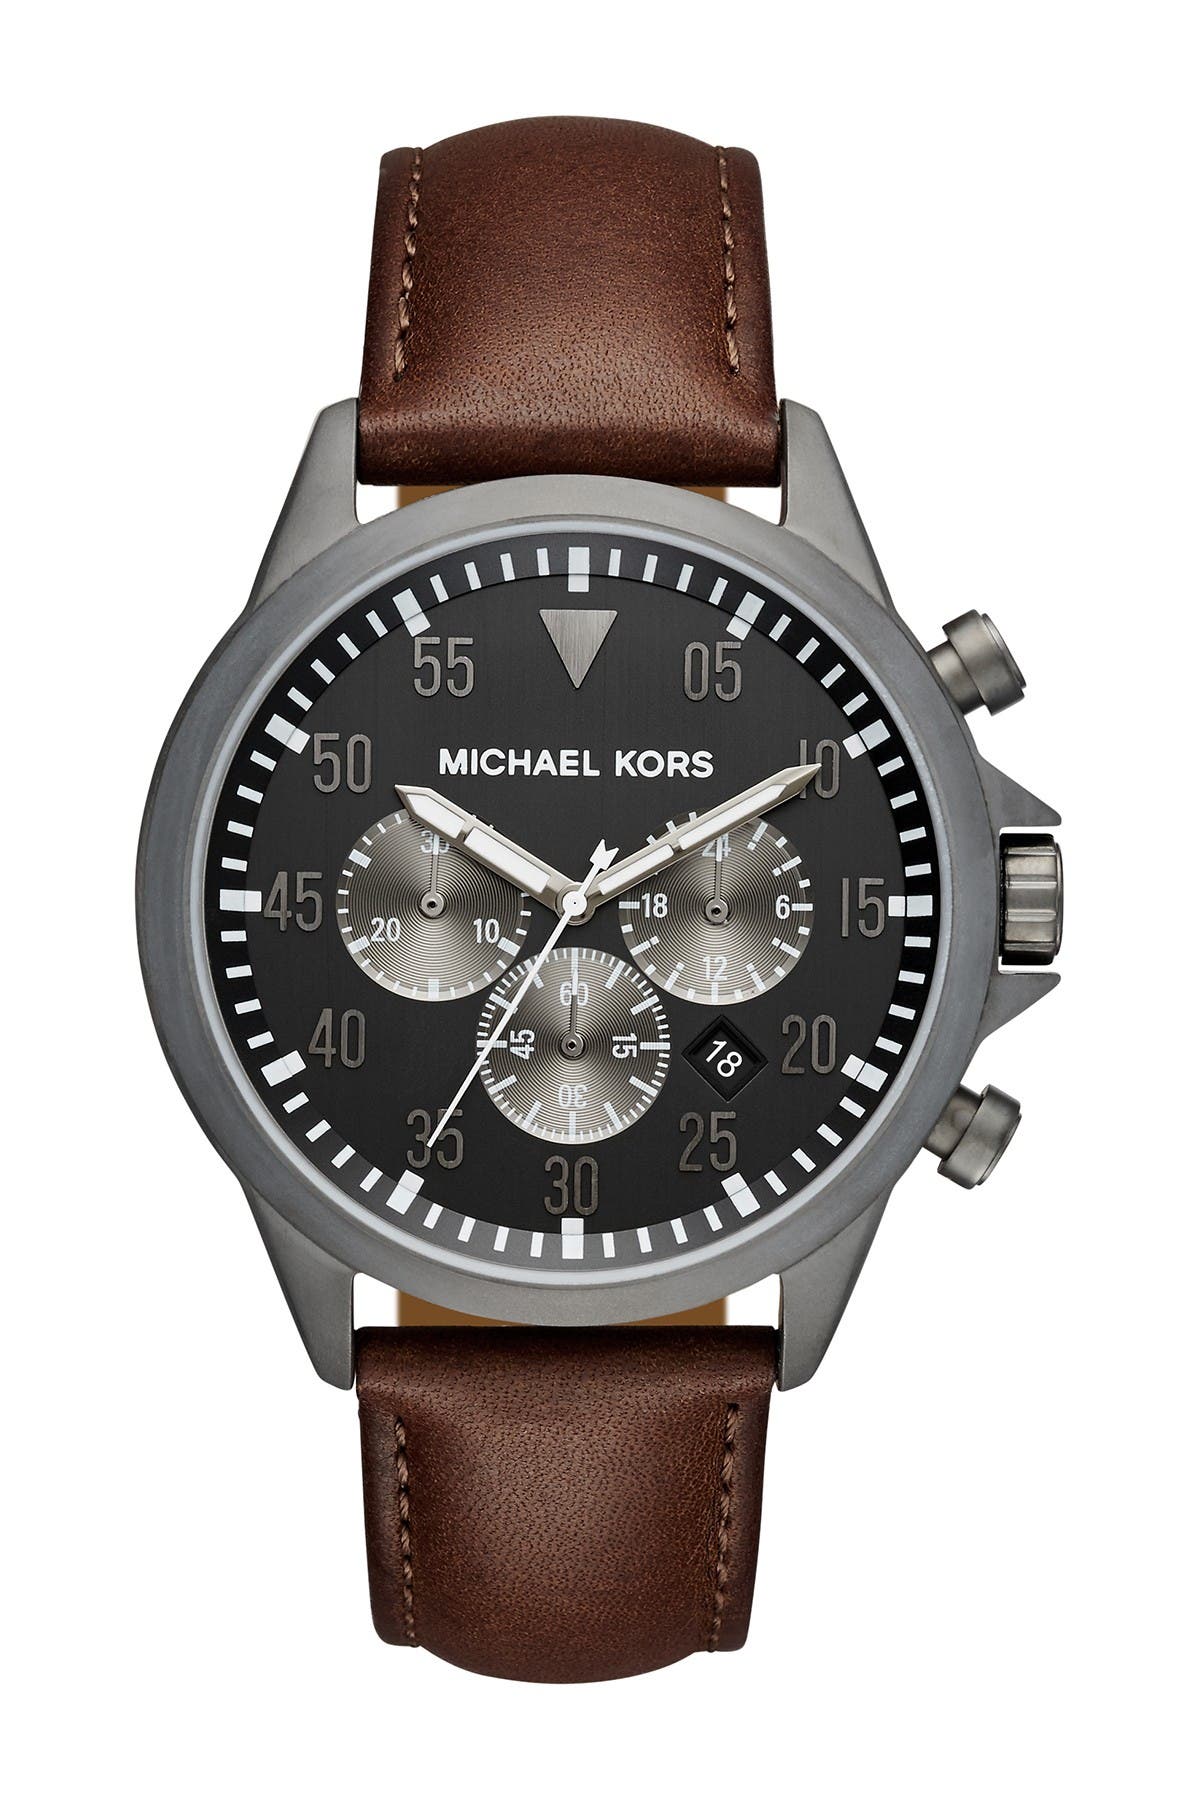 michael kors men's 44mm gage chronograph watch with brown leather strap